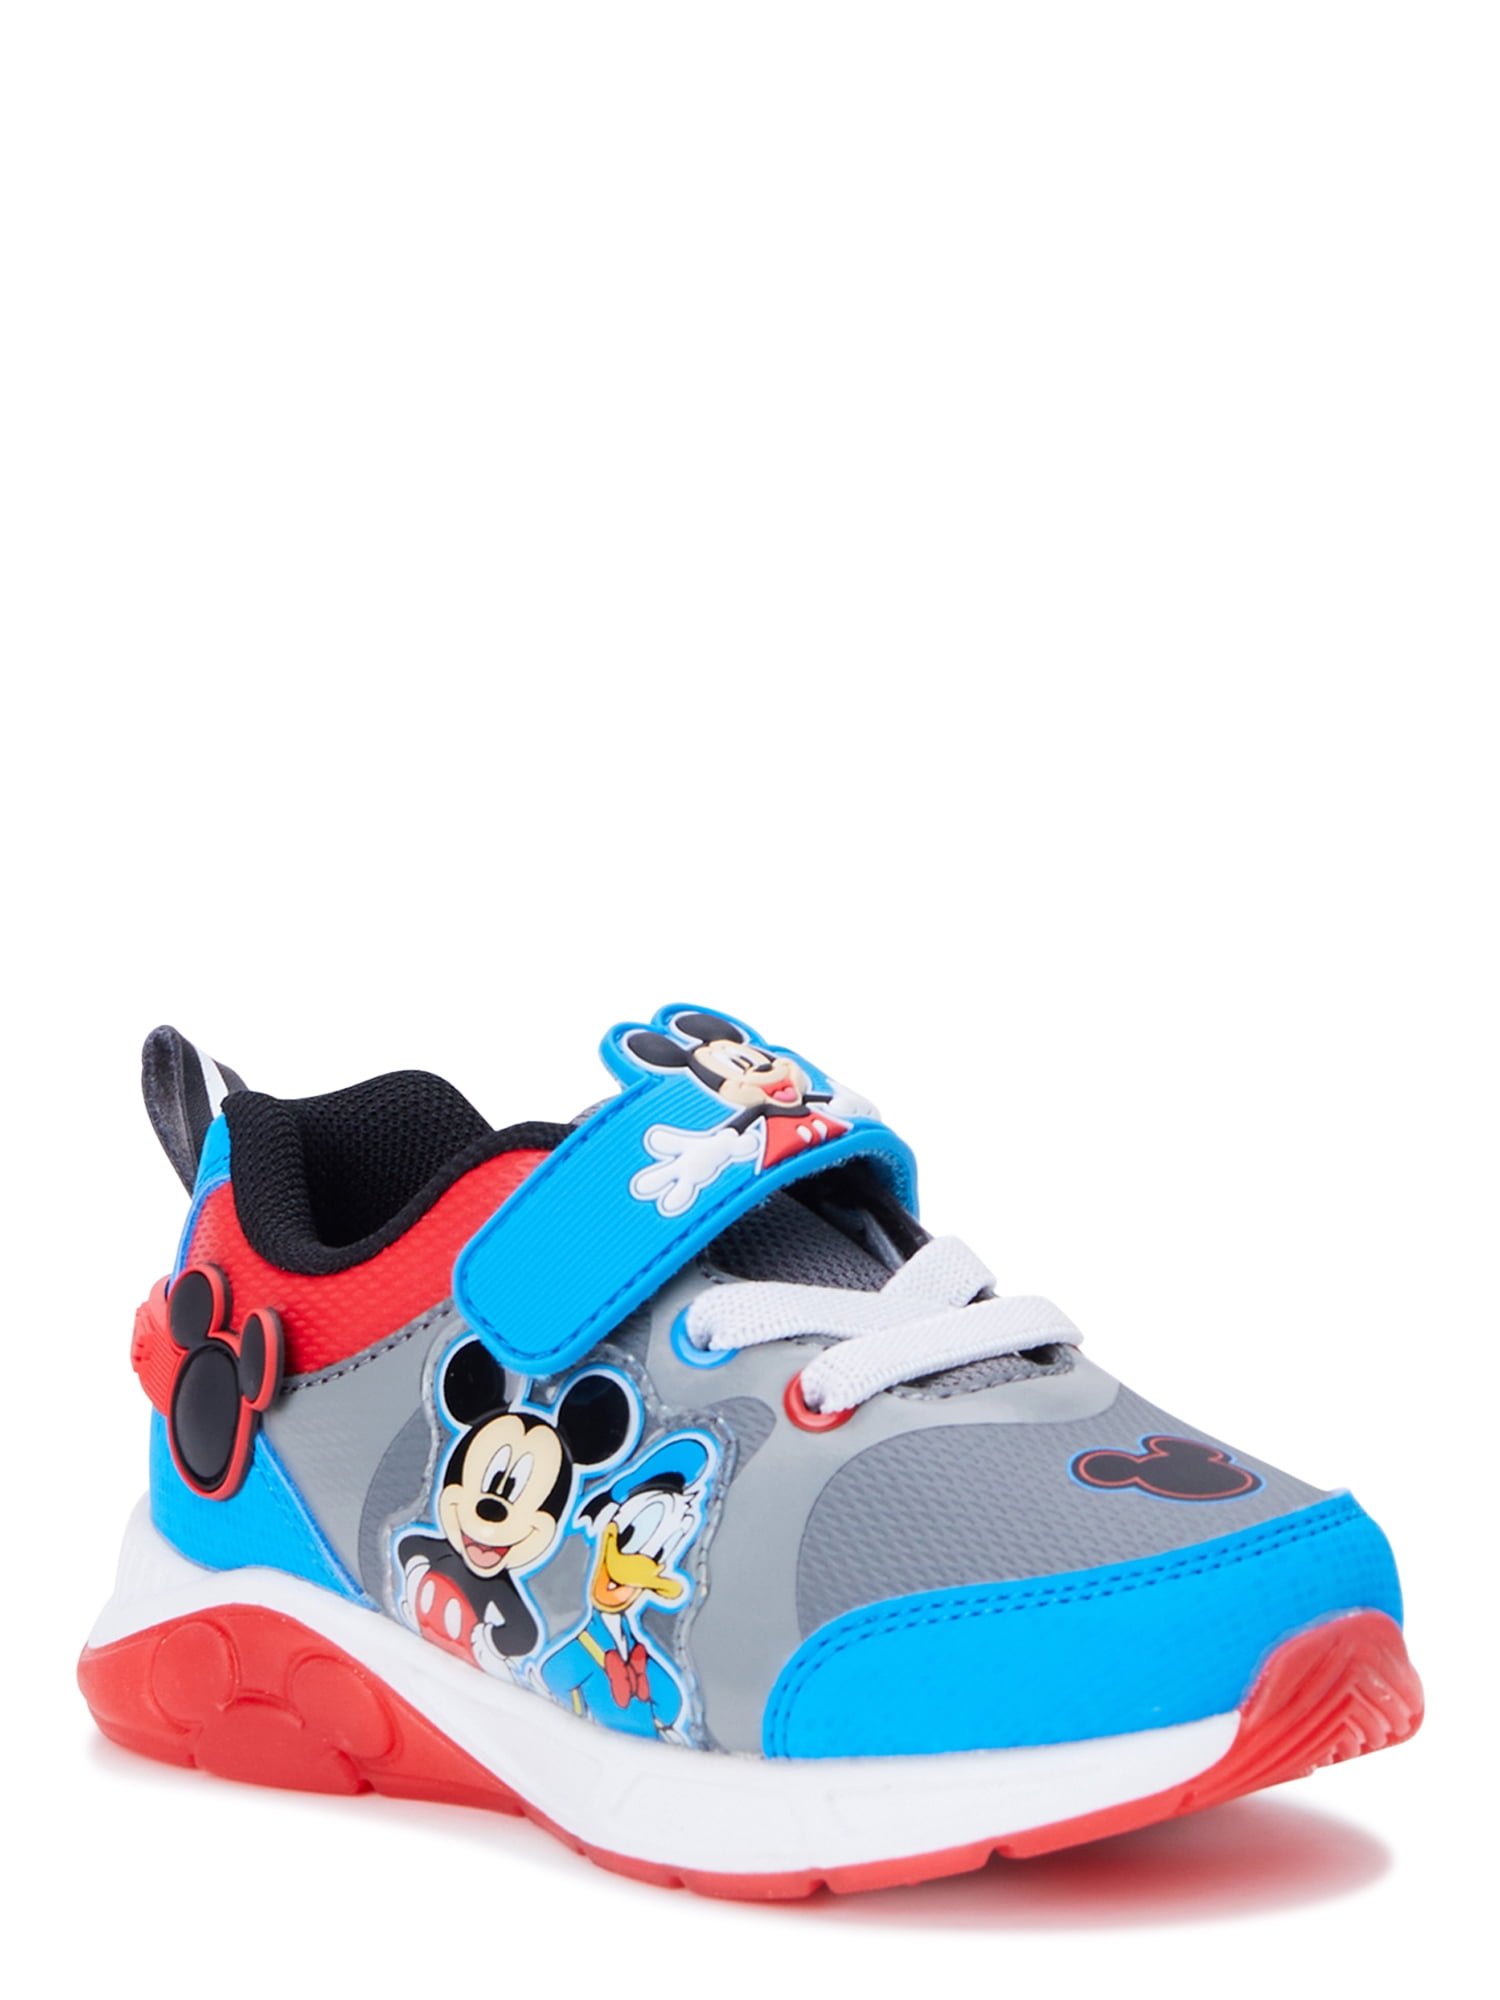 Mickey Mouse Toddler Boys Light Up Athletic Sneakers, Sizes 7-12